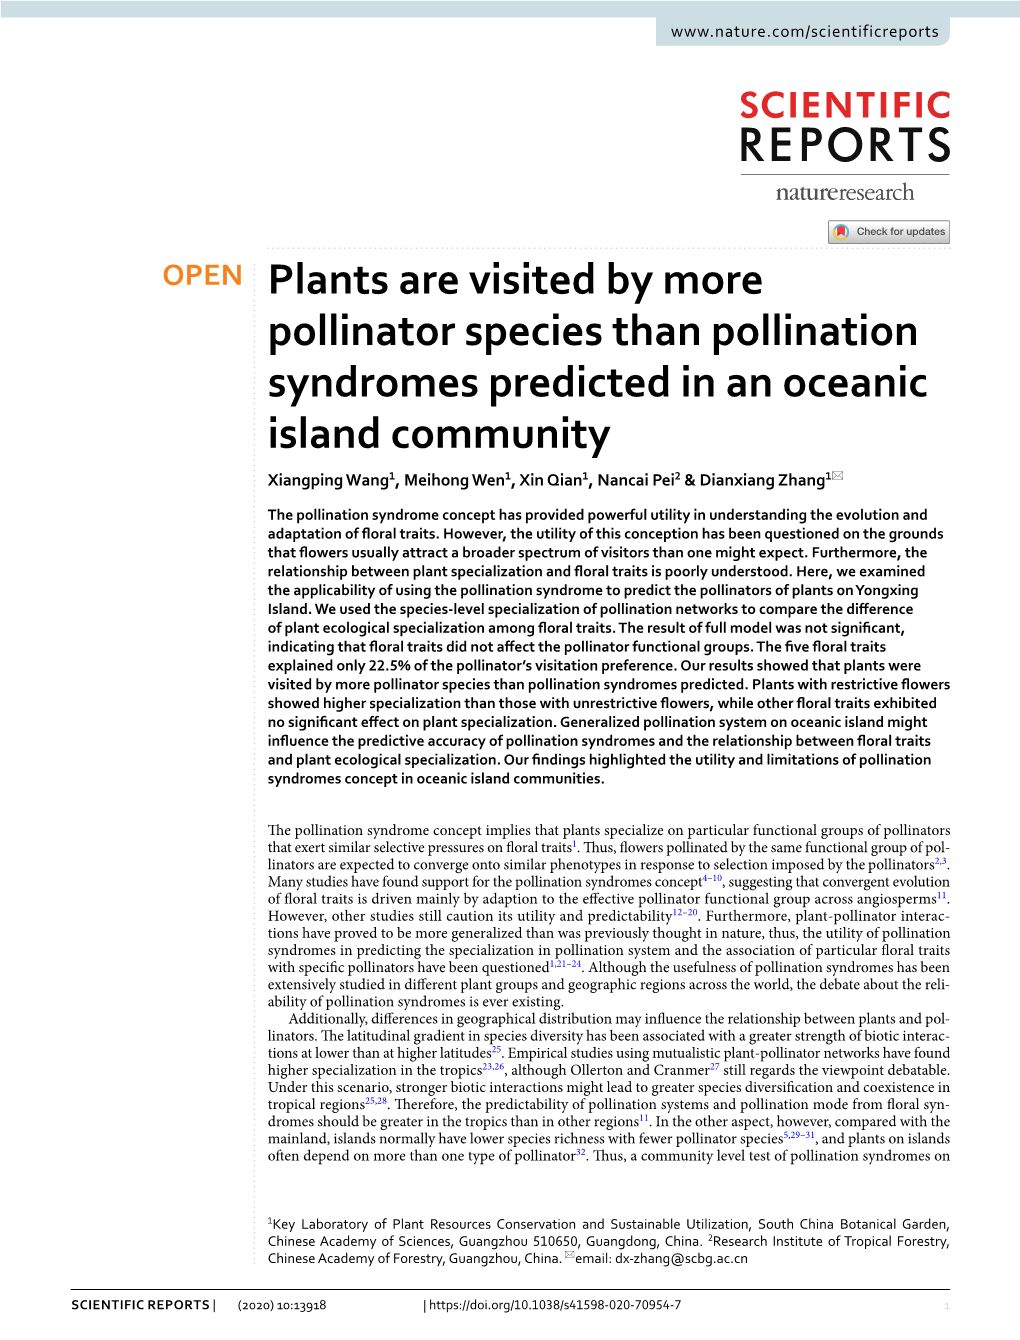 Plants Are Visited by More Pollinator Species Than Pollination Syndromes